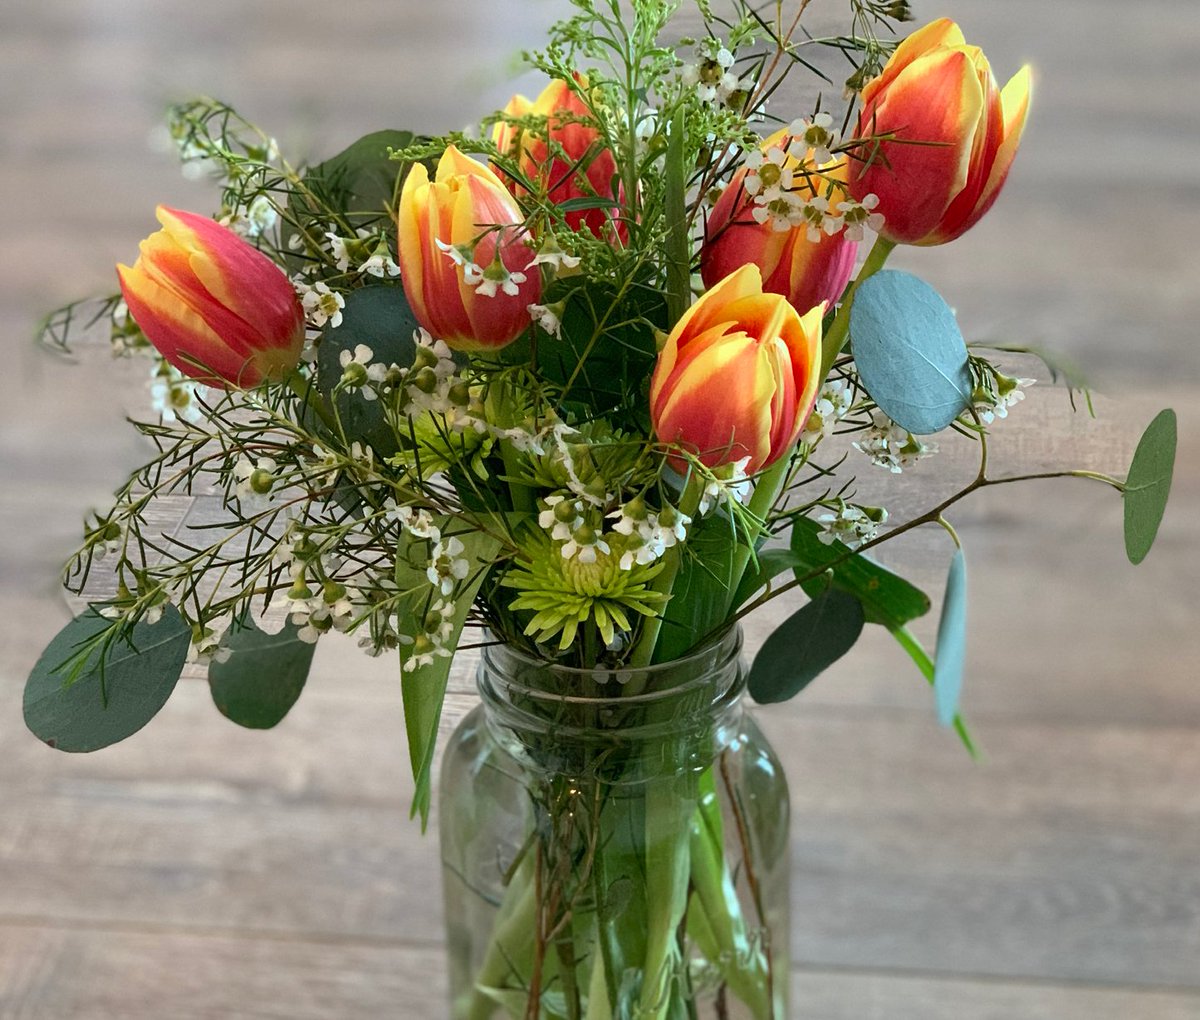 Can we start a new thing? Tulip Tuesday! 

#shoppoppies #floral #floraldesign #flowers #tuliptuesday #wejustmadethatup #centerpiece #diy #flowershop #arrangement #tulipgram #flowerpower #beautiful #pretty #blooms #tulips